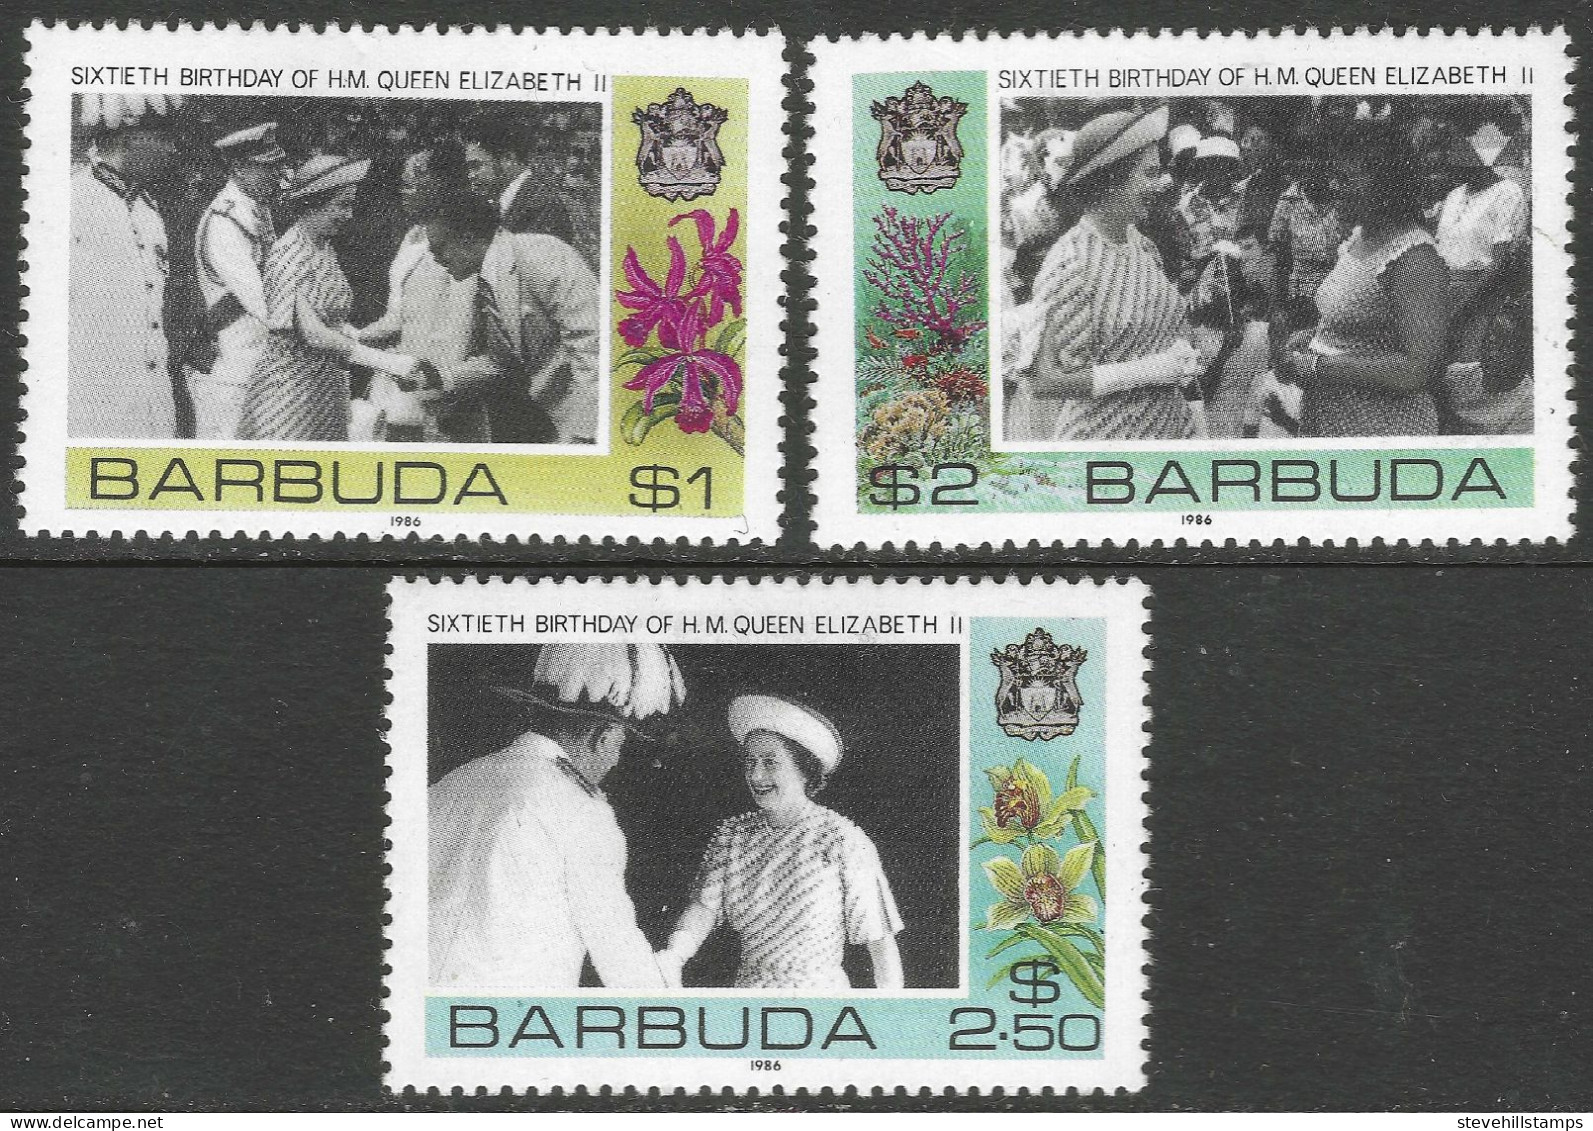 Barbuda. 1986 60th Birthday Of QEII (1st Issue).  MH Complete Set (excl M/S).  SG 861-863. M4062 - Antigua Et Barbuda (1981-...)